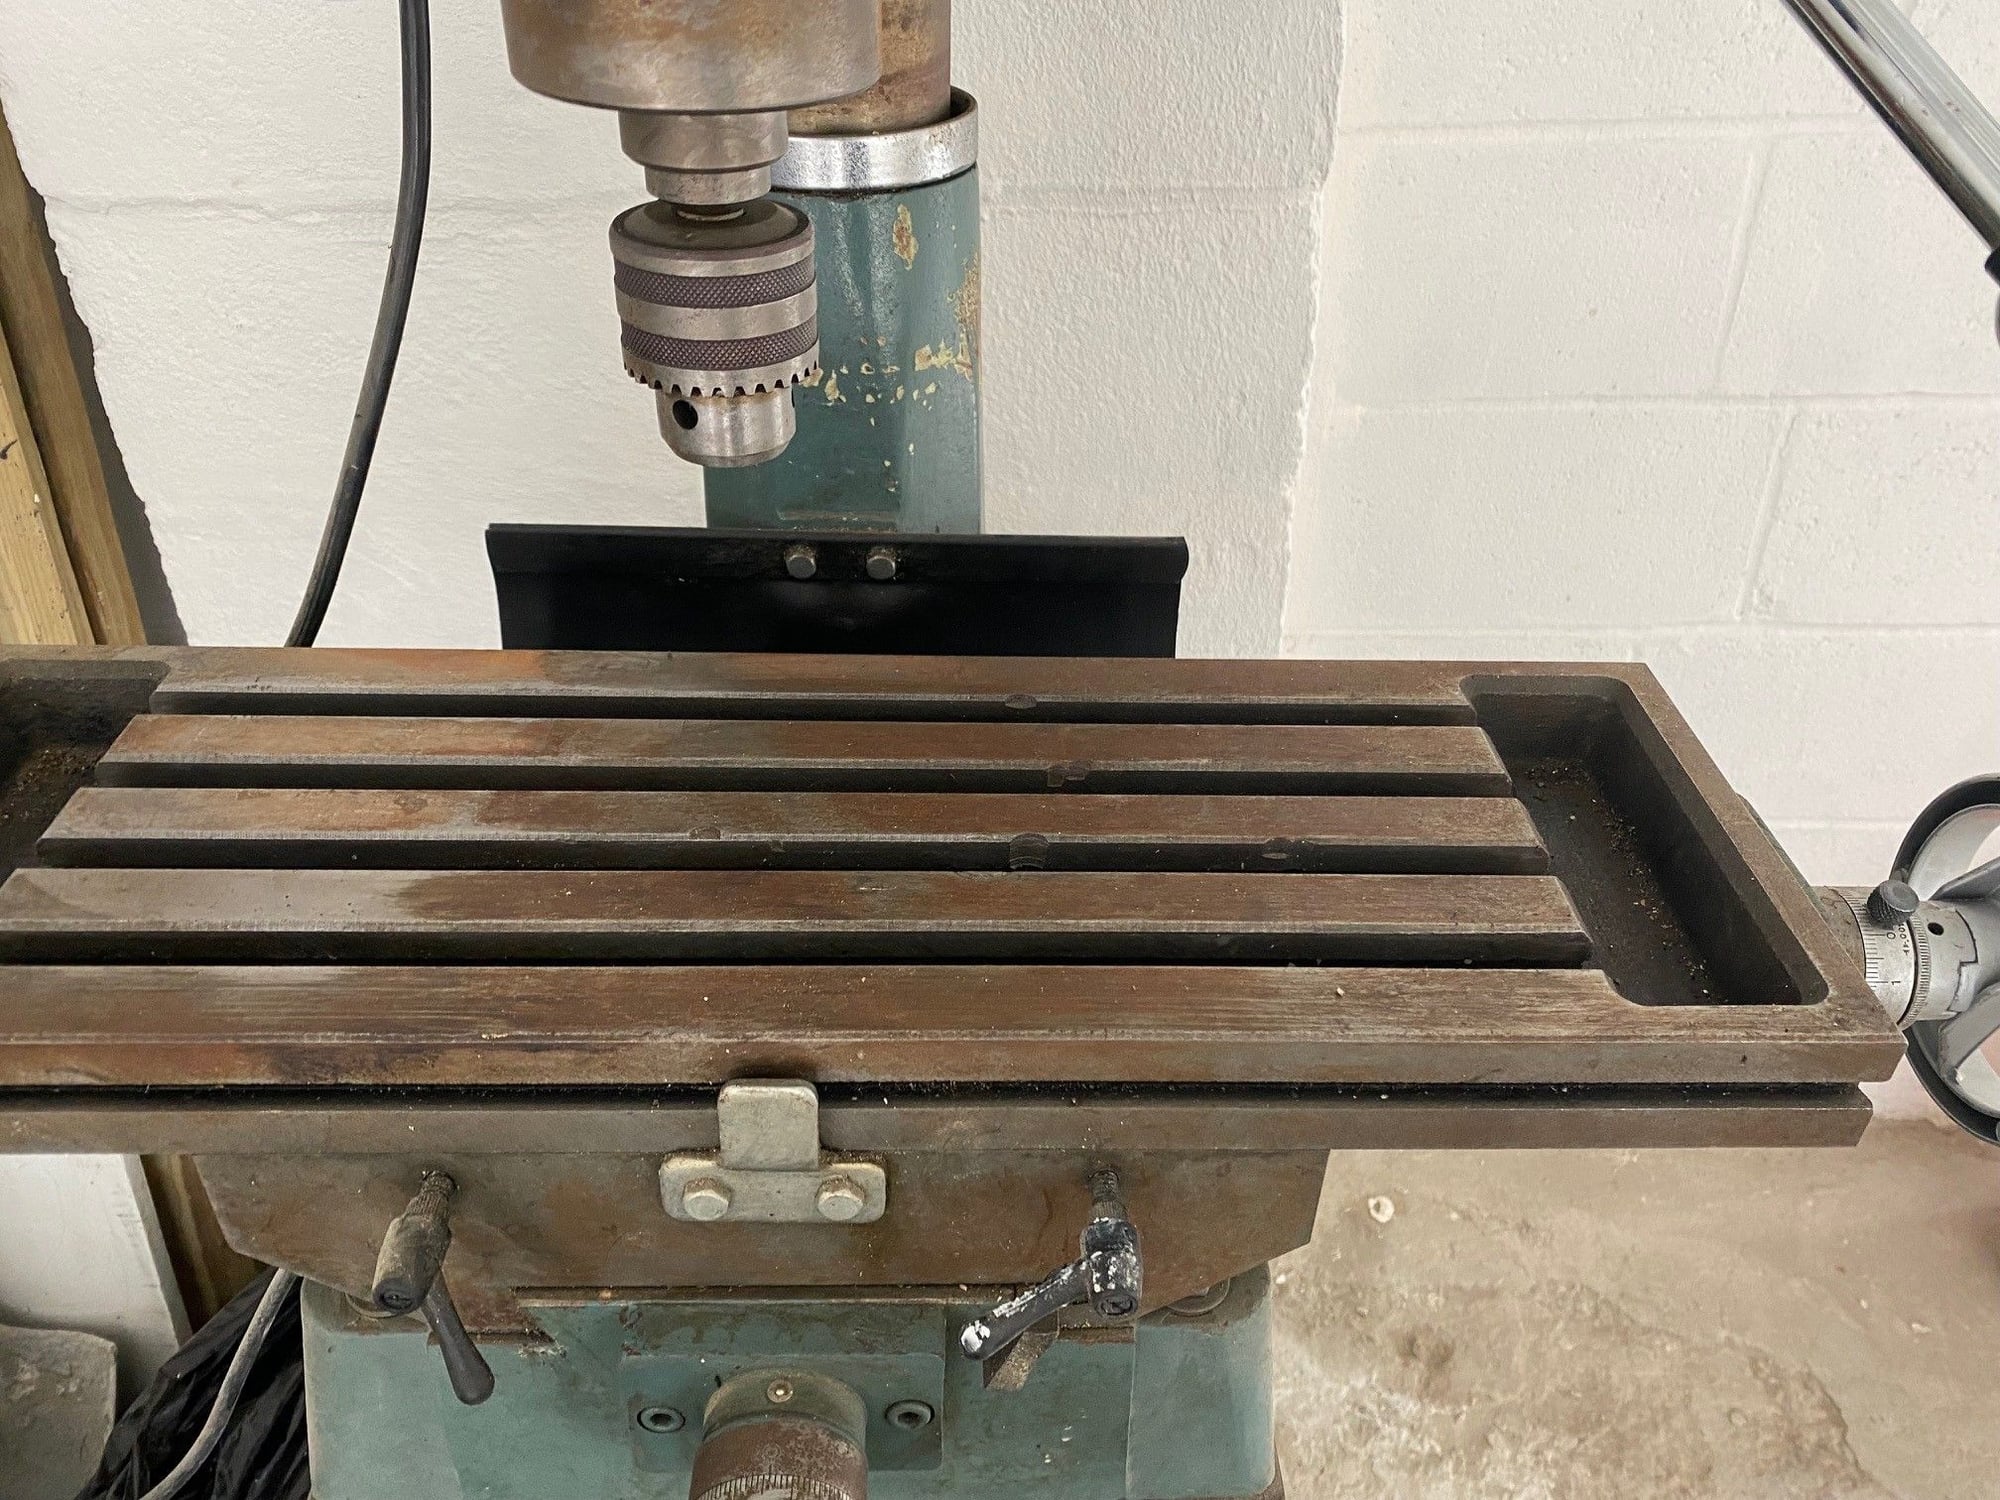 Miscellaneous - Enco Milling Machine Drill Press 24" bed - Used - 0  All Models - Jersey City, NJ 07306, United States